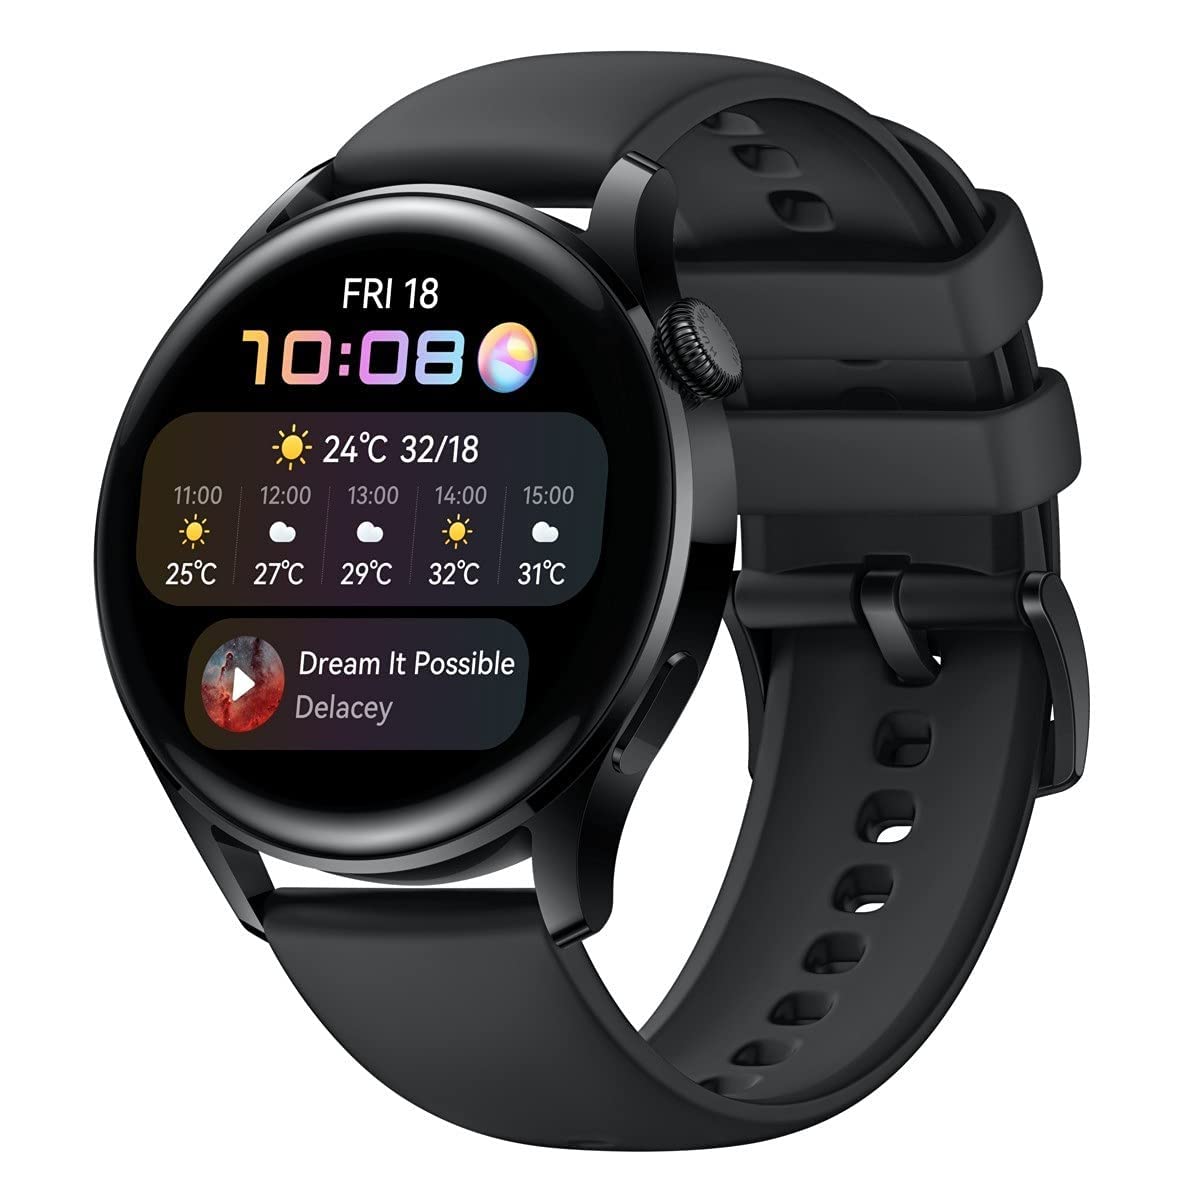 HUAWEI Watch 3 | Connected GPS Smartwatch with Sp02 and All-Day Health Monitoring | 14 Days Battery Life - Black Fluoroelastomer Strap